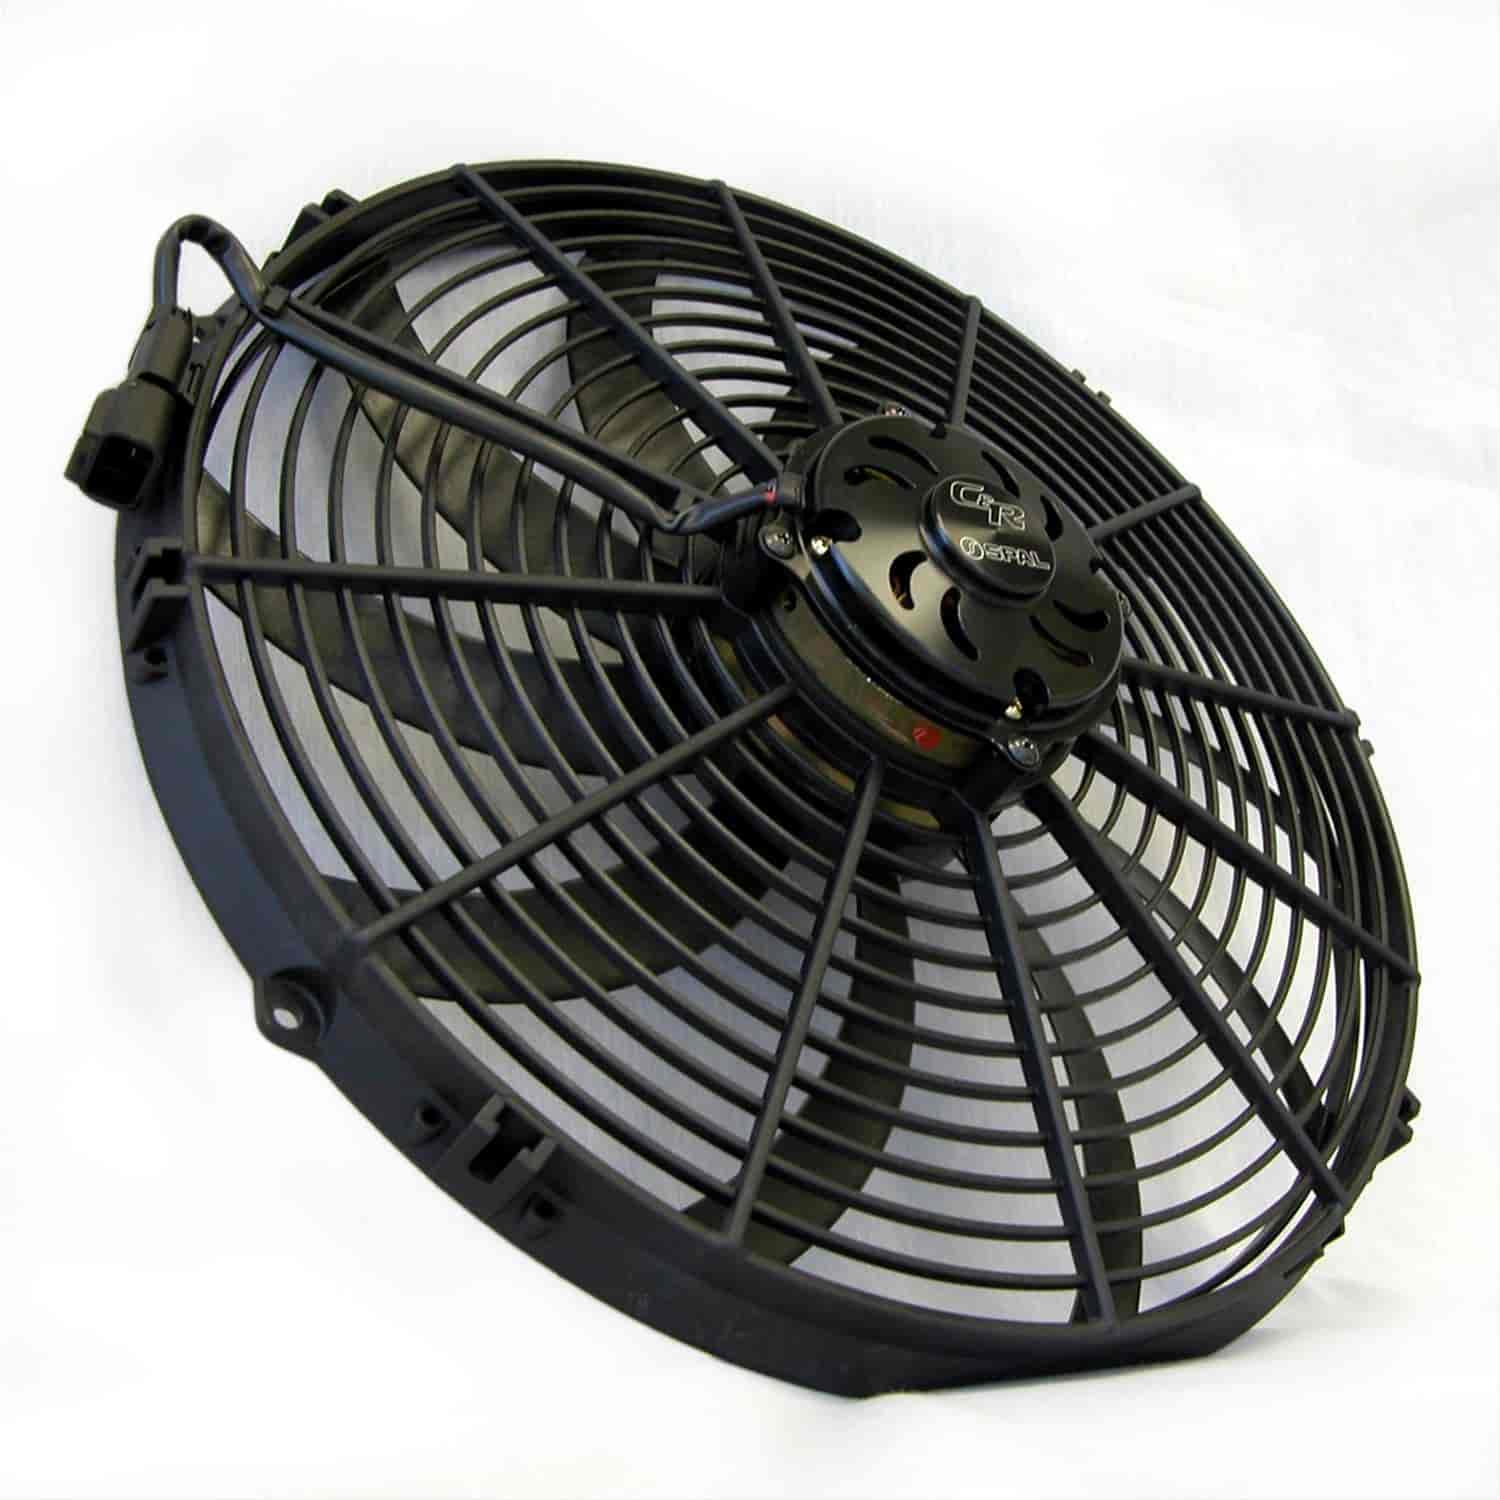 Spal 16 Fan with Carbon Hydro Dip - Black Matte Finish